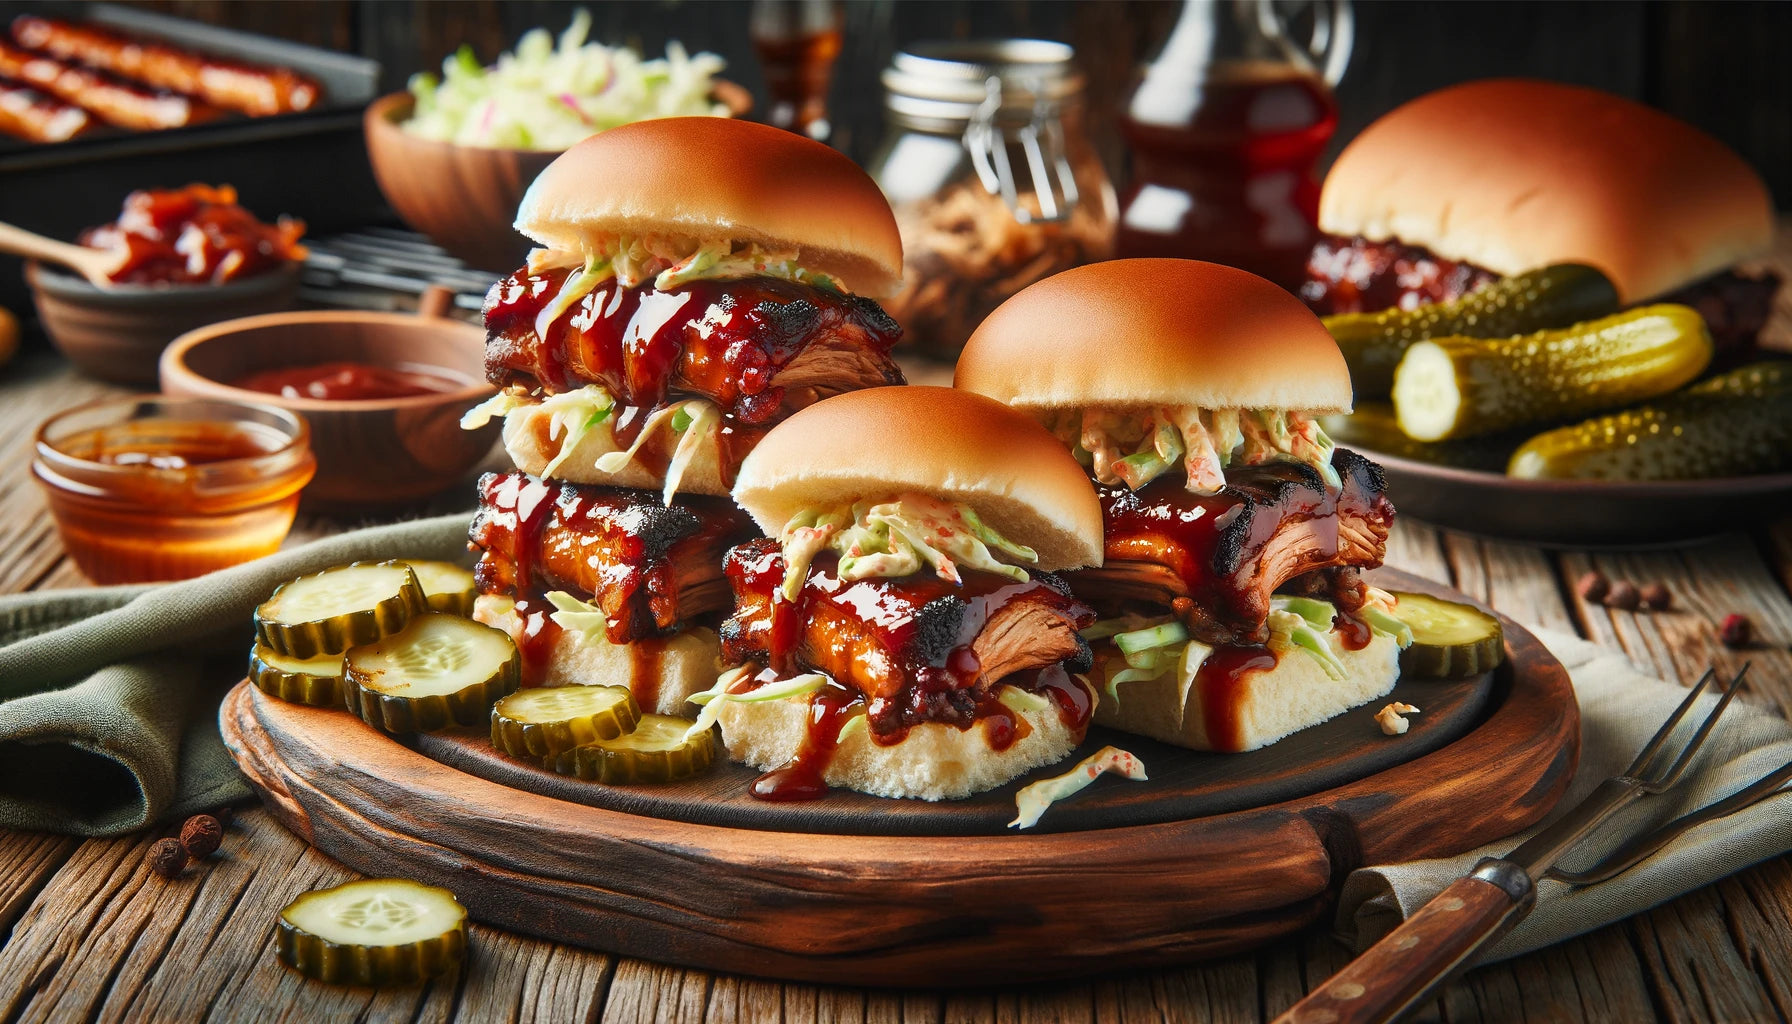 DIY McRib-Style Pork Sliders, featuring tender, juicy pork smothered in sweet BBQ sauce, nestled in slider buns and topped with coleslaw and pickles